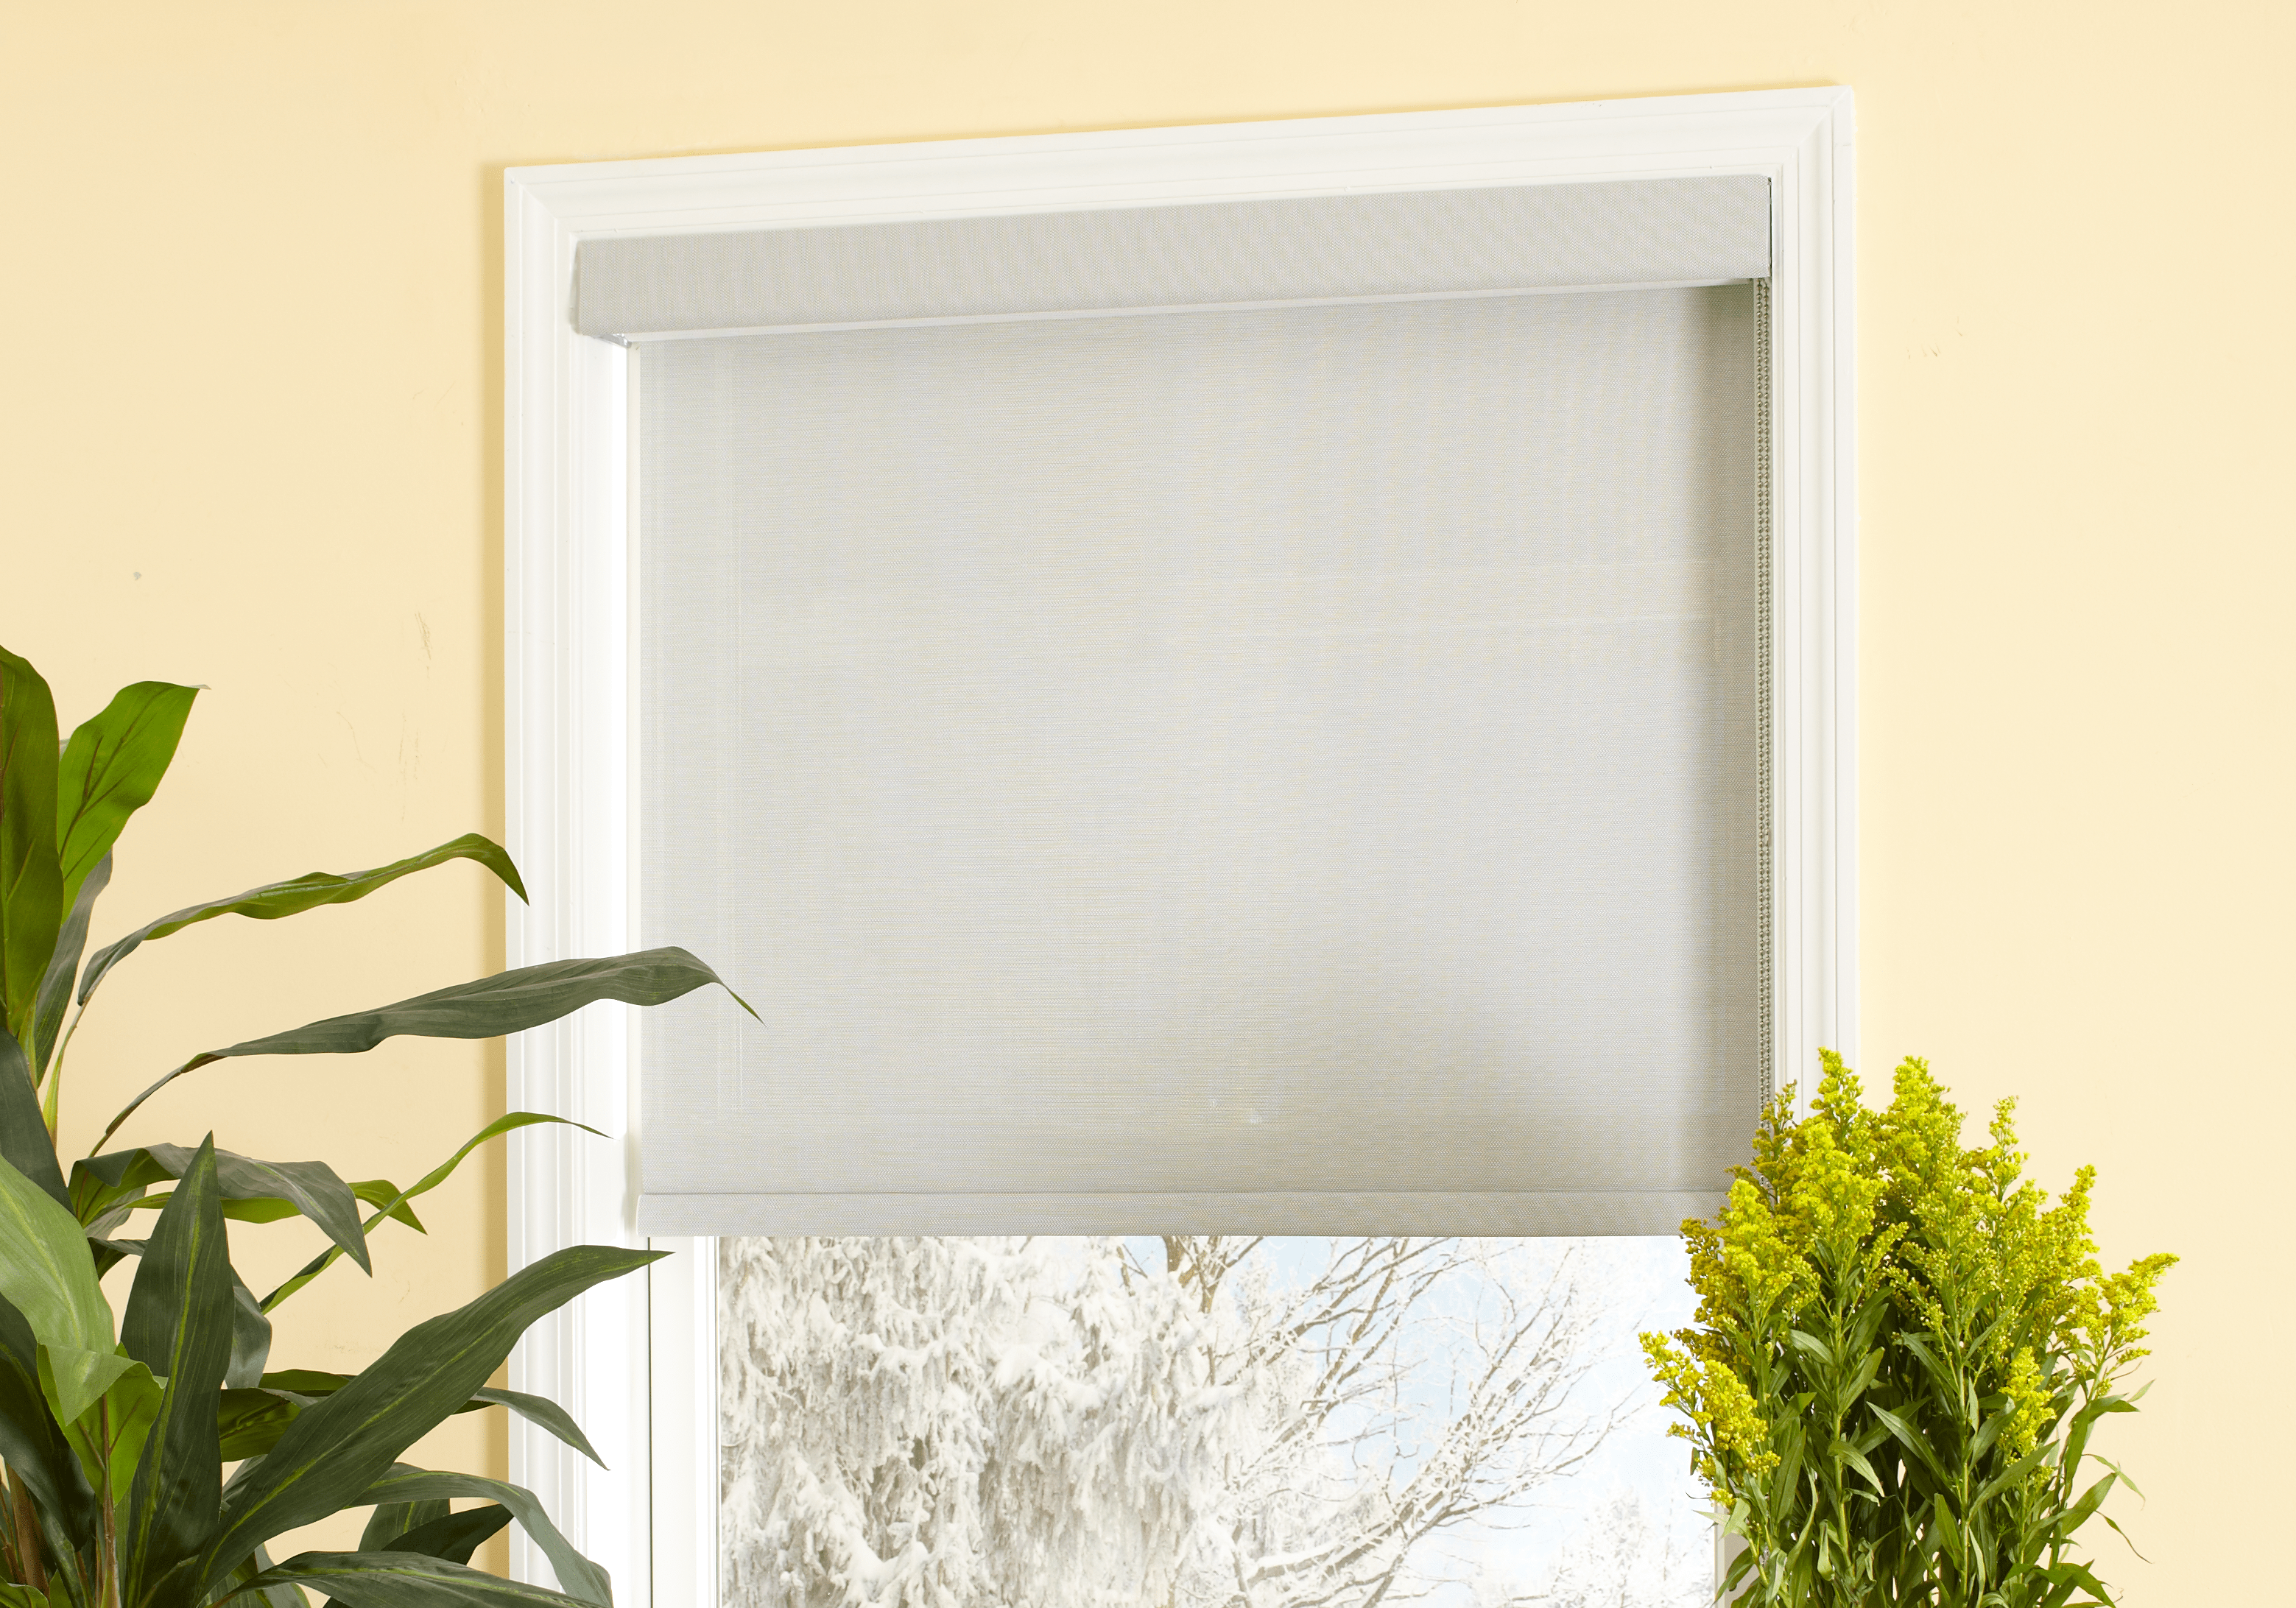 A window features inside mount roller shades.